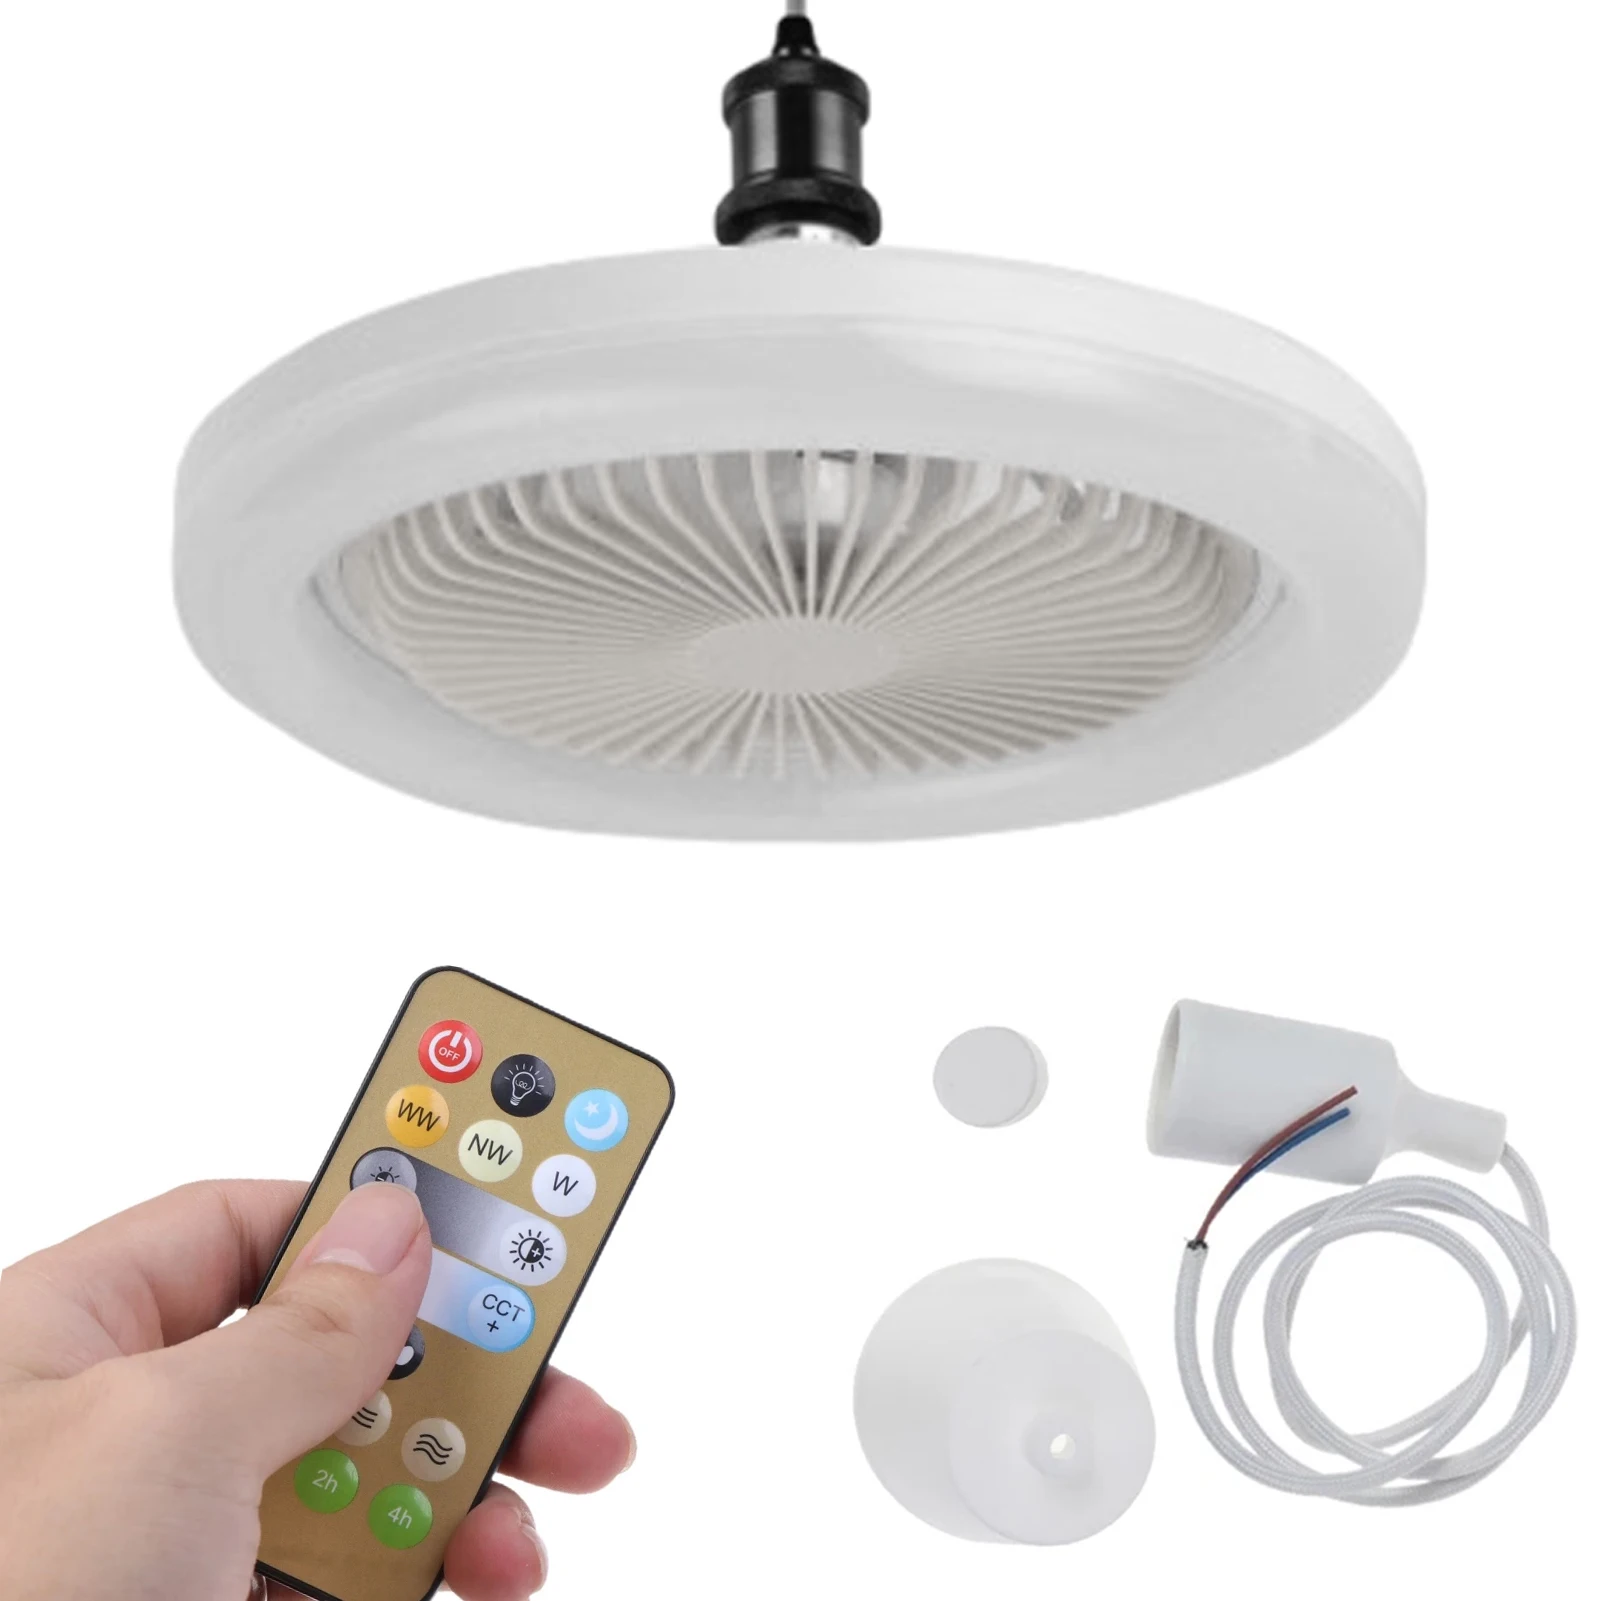 30W Ceiling Fan With Integrated Lights E27 Remote Ceiling Lighting Bedroom Living Room Switch Control 2400LM Home Lamps AC86-25V